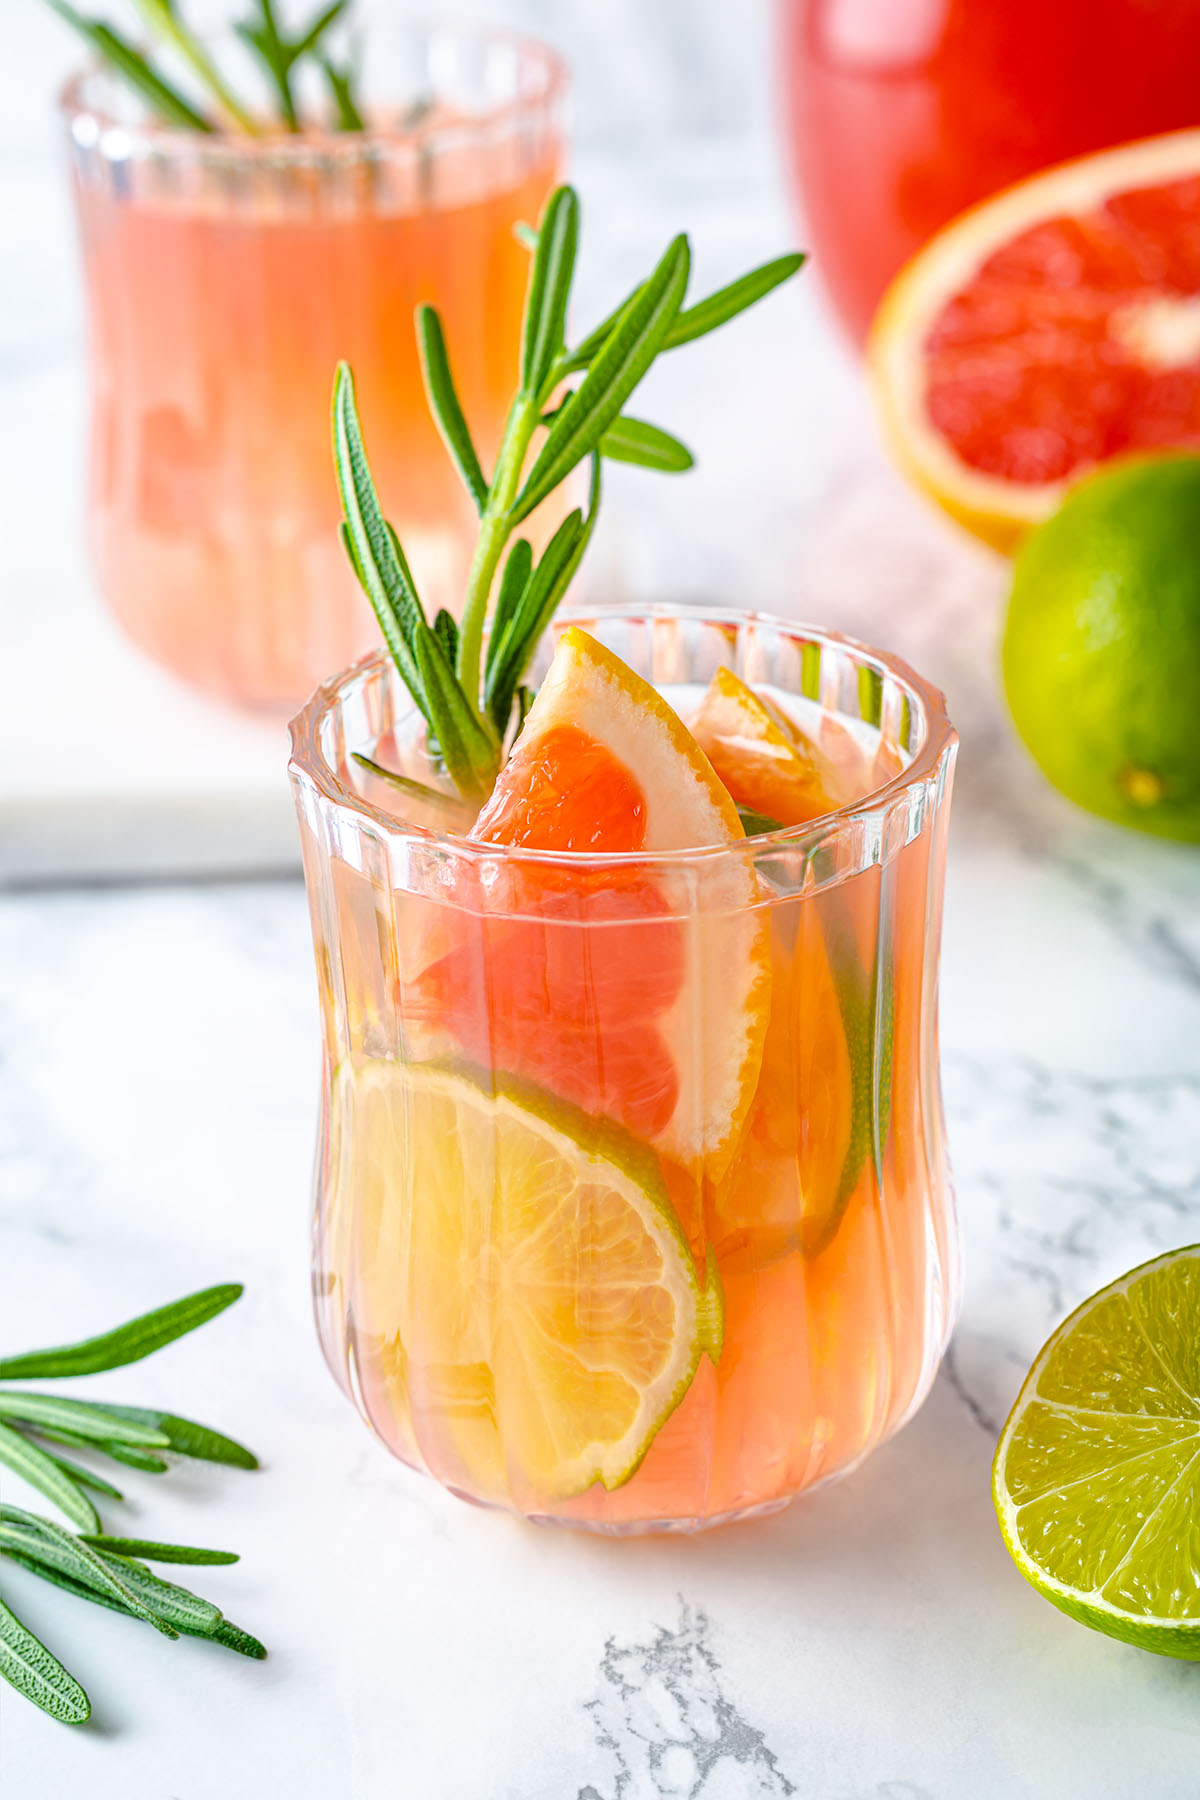 Grapefruit lime drink in a glass with rosemary